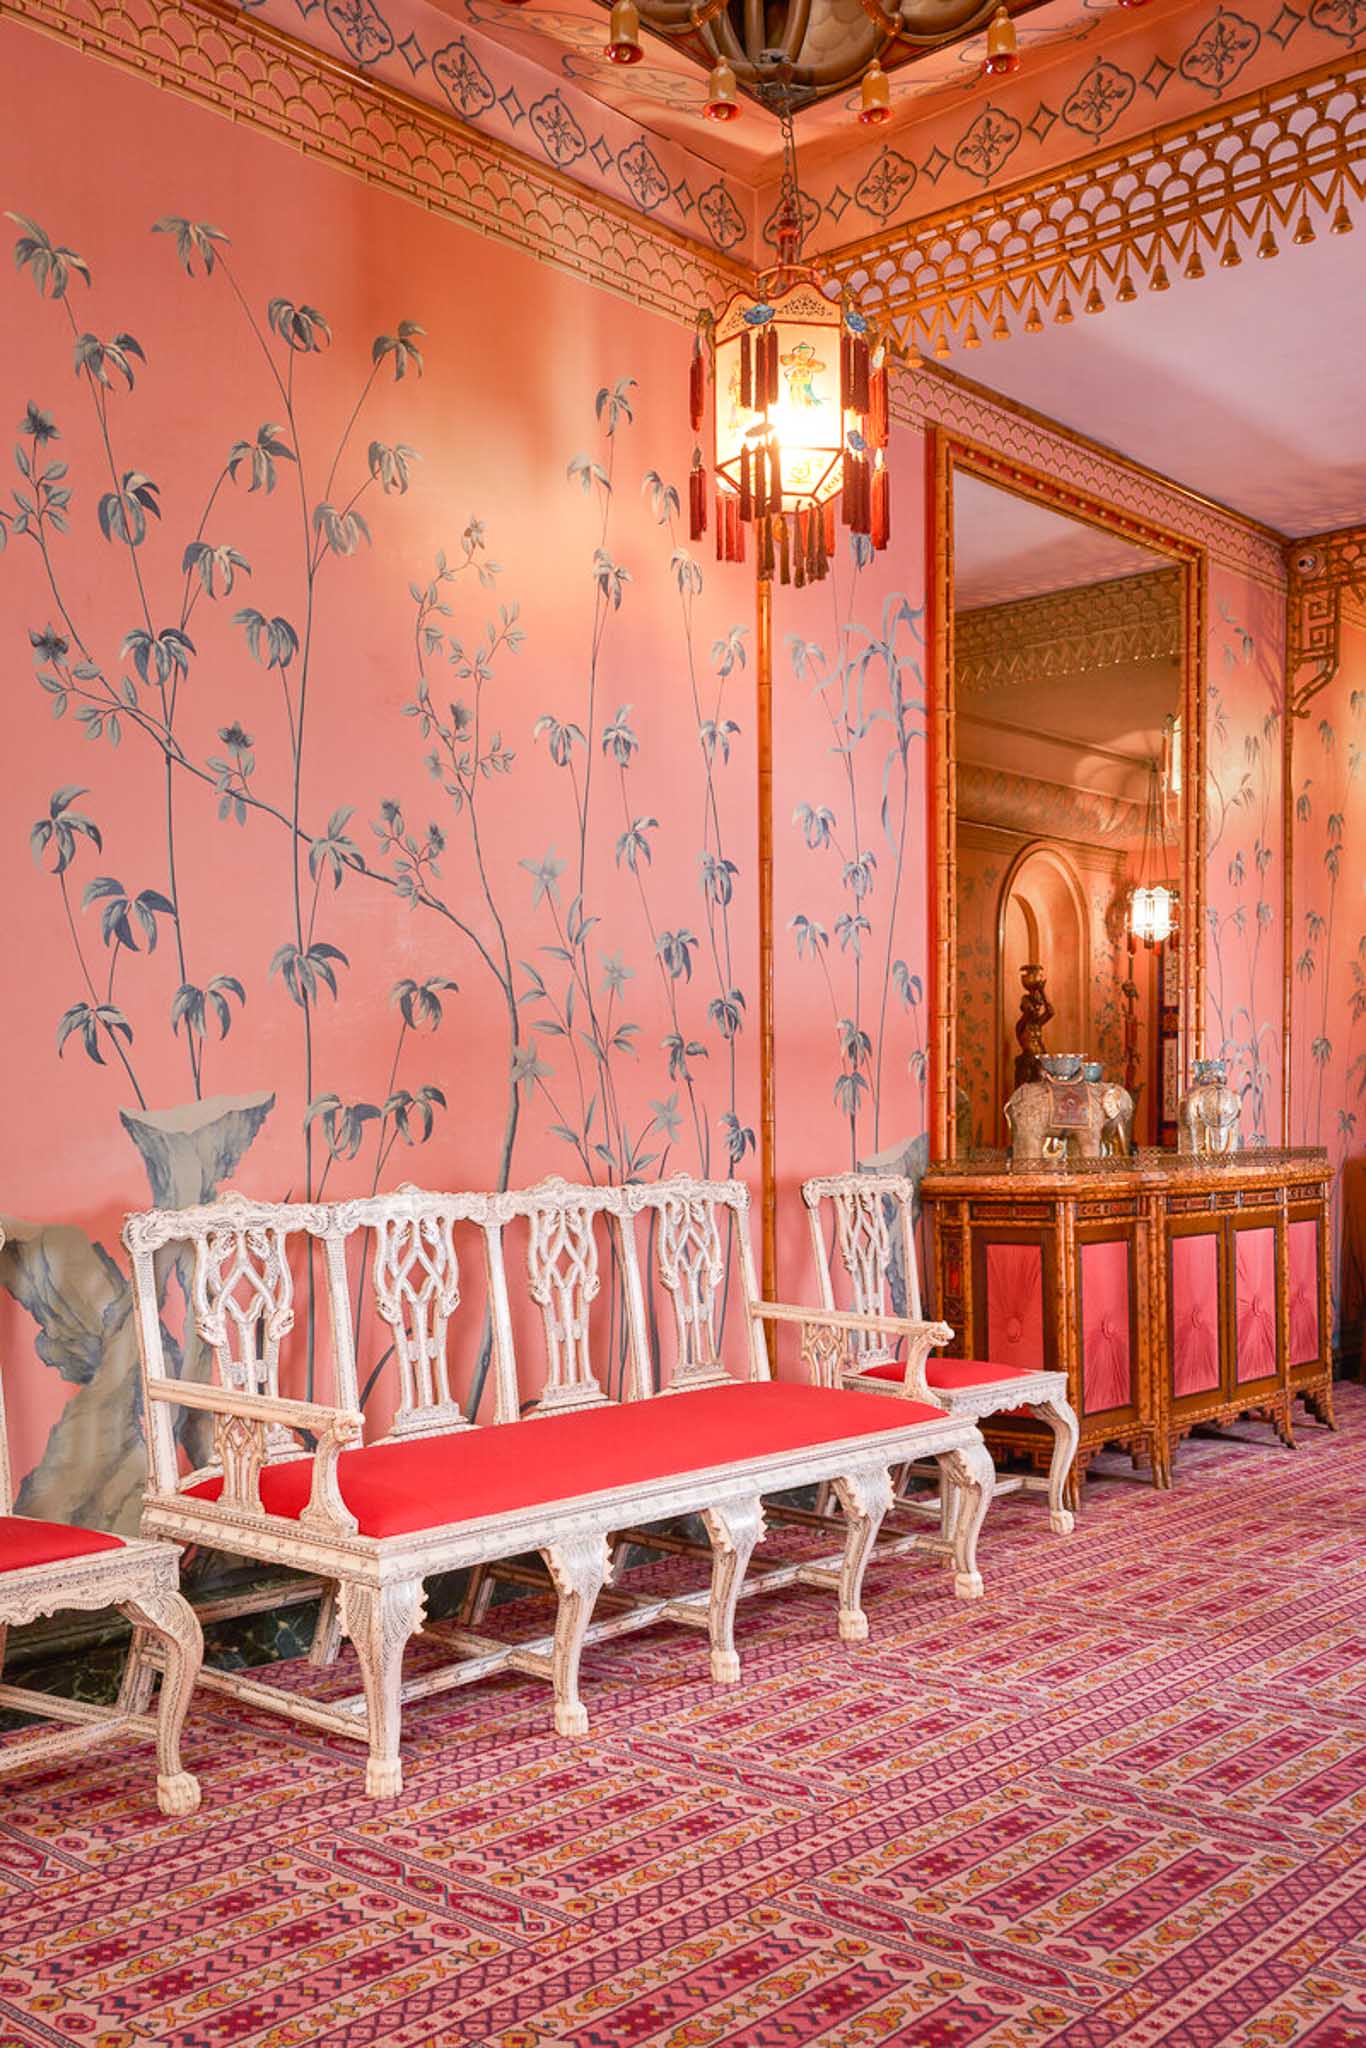 Maximalist interiors of Brighton Pavilion featuring pink and blue chinoiserie wallpaper and pint antique furniture